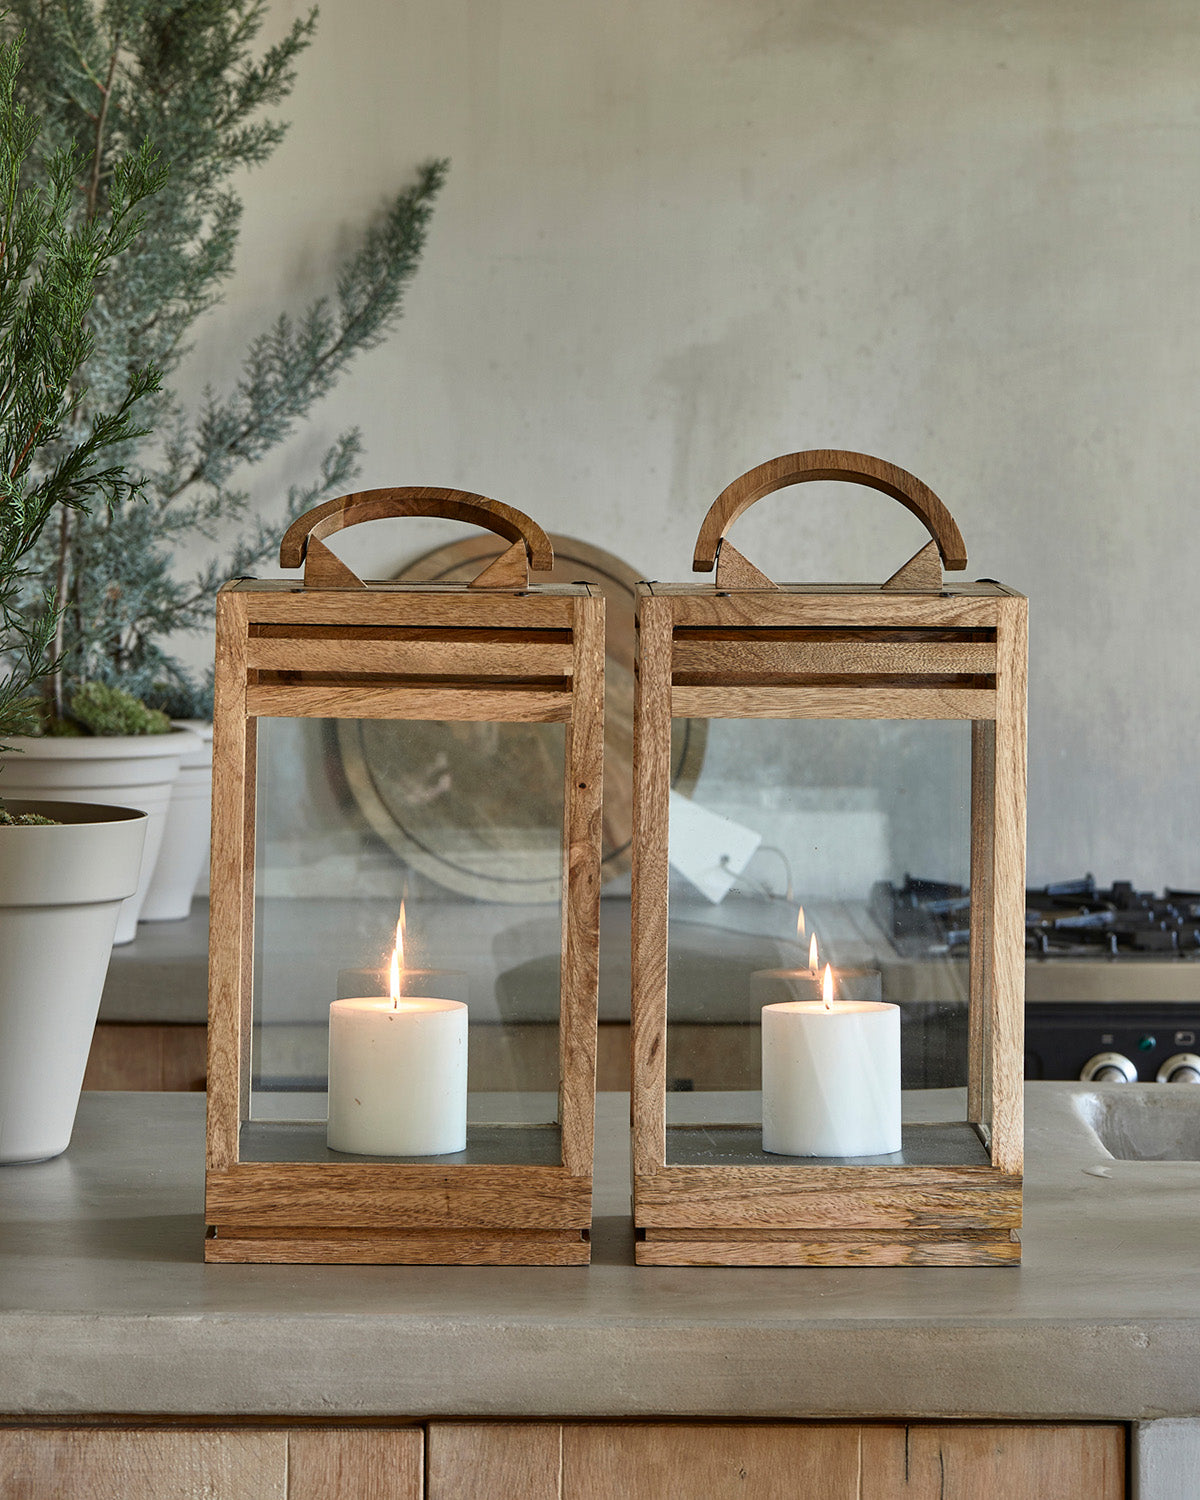 Two LANTERNS constructed from glass and wood with candles on its iron base by Riviera Maison